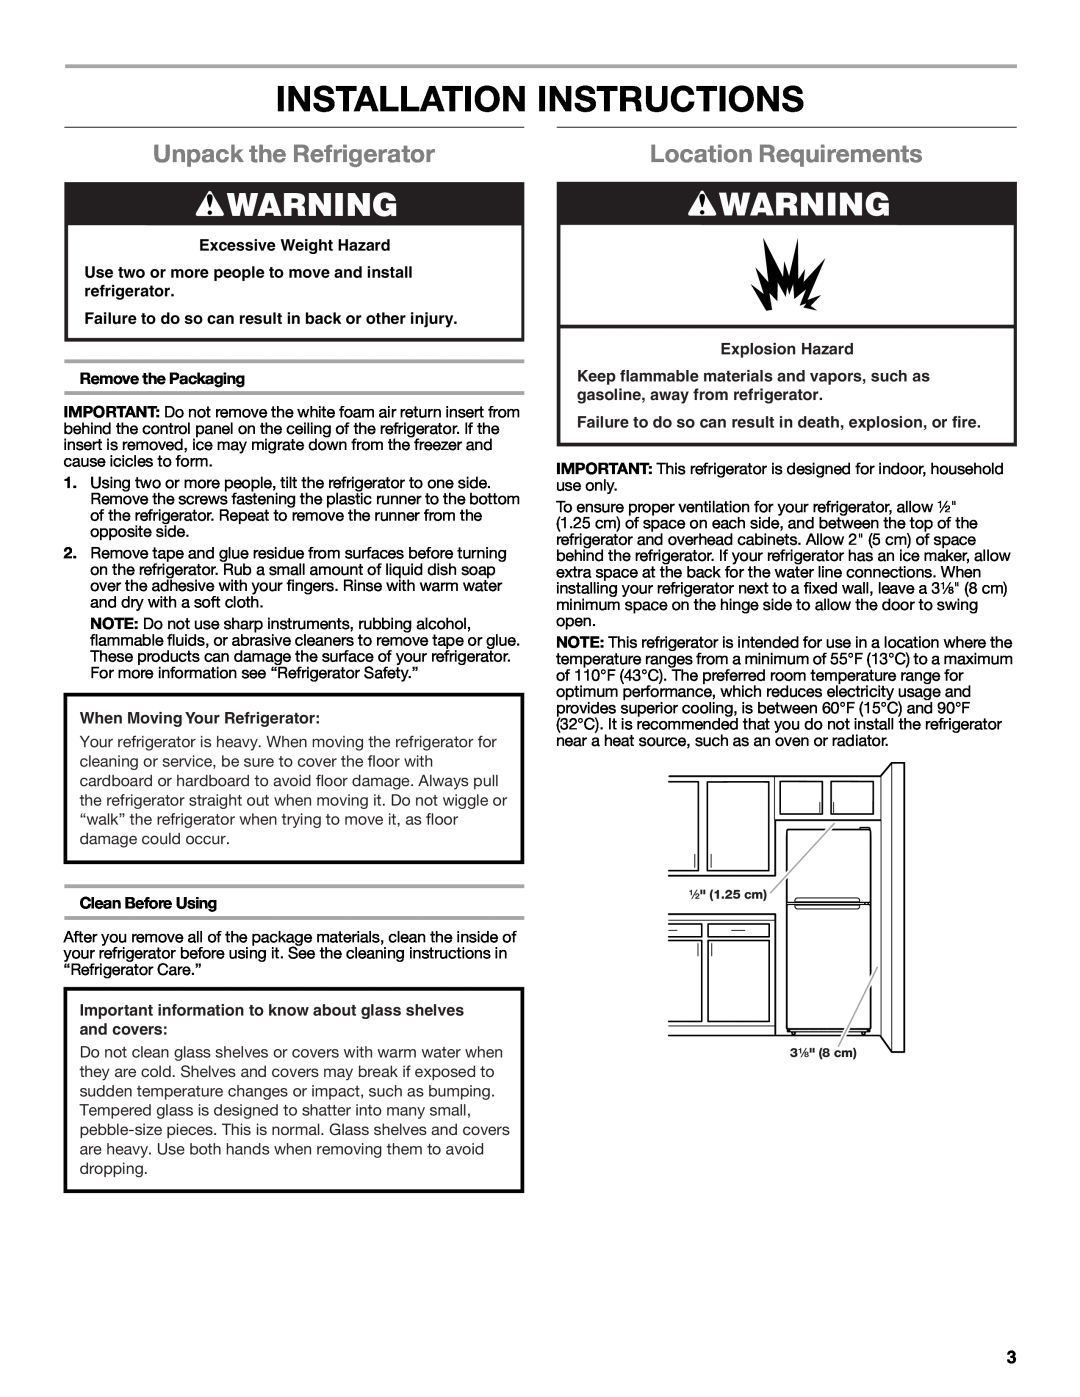 Whirlpool W10475403A Installation Instructions, Unpack the Refrigerator, Location Requirements, Excessive Weight Hazard 